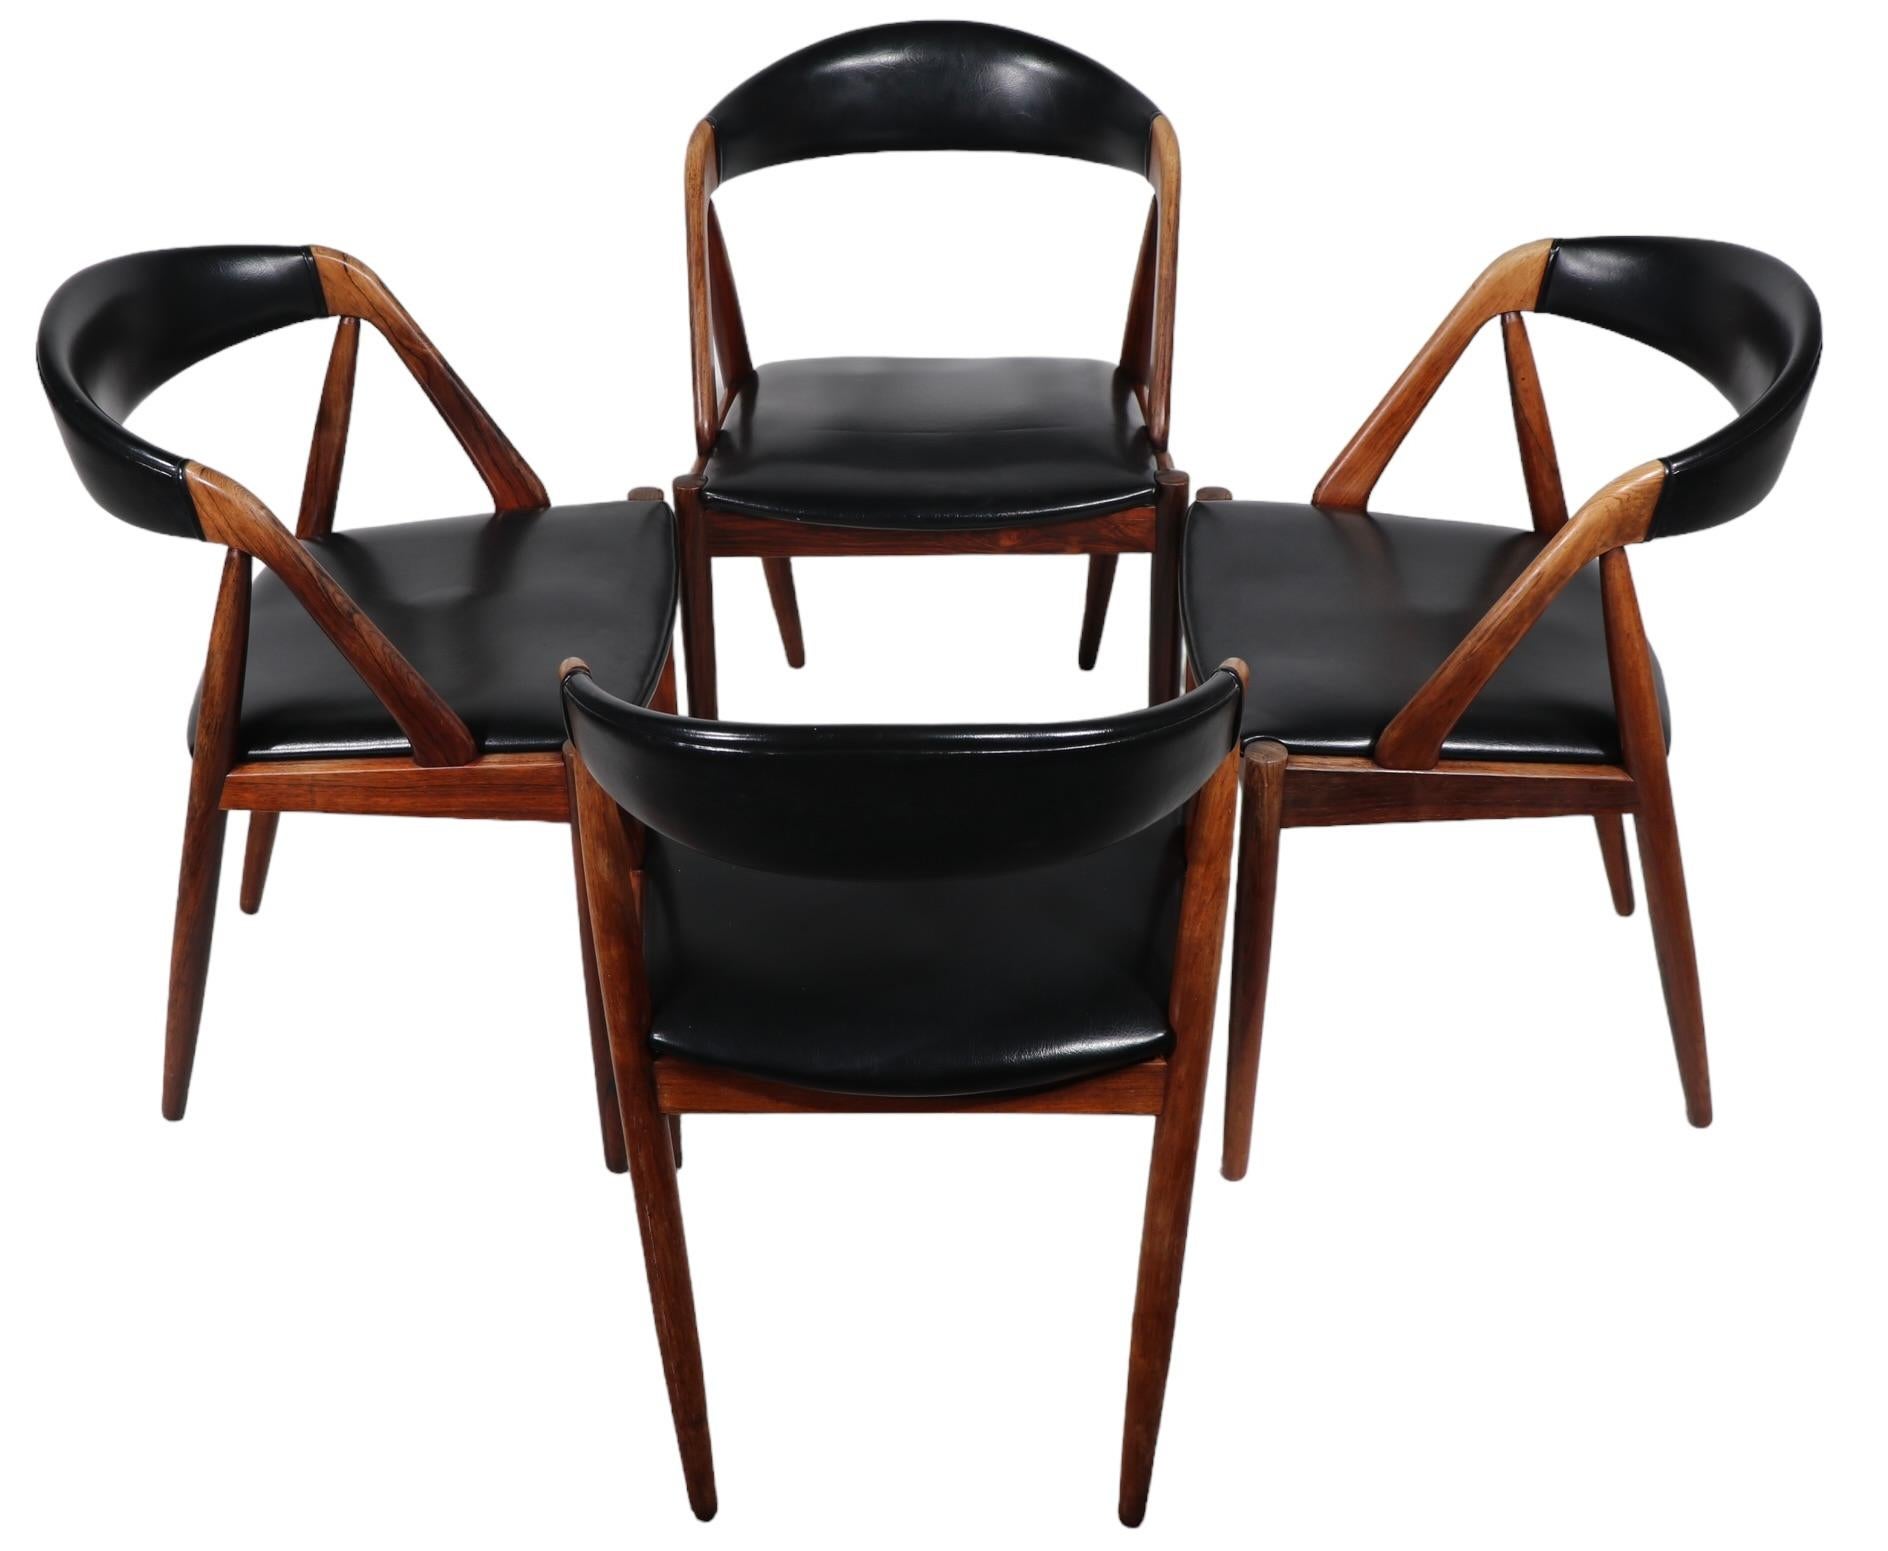  4 Rosewood Model 31 Danish Mid Century Modern Dining Chairs by Kai Kristiansen  For Sale 4